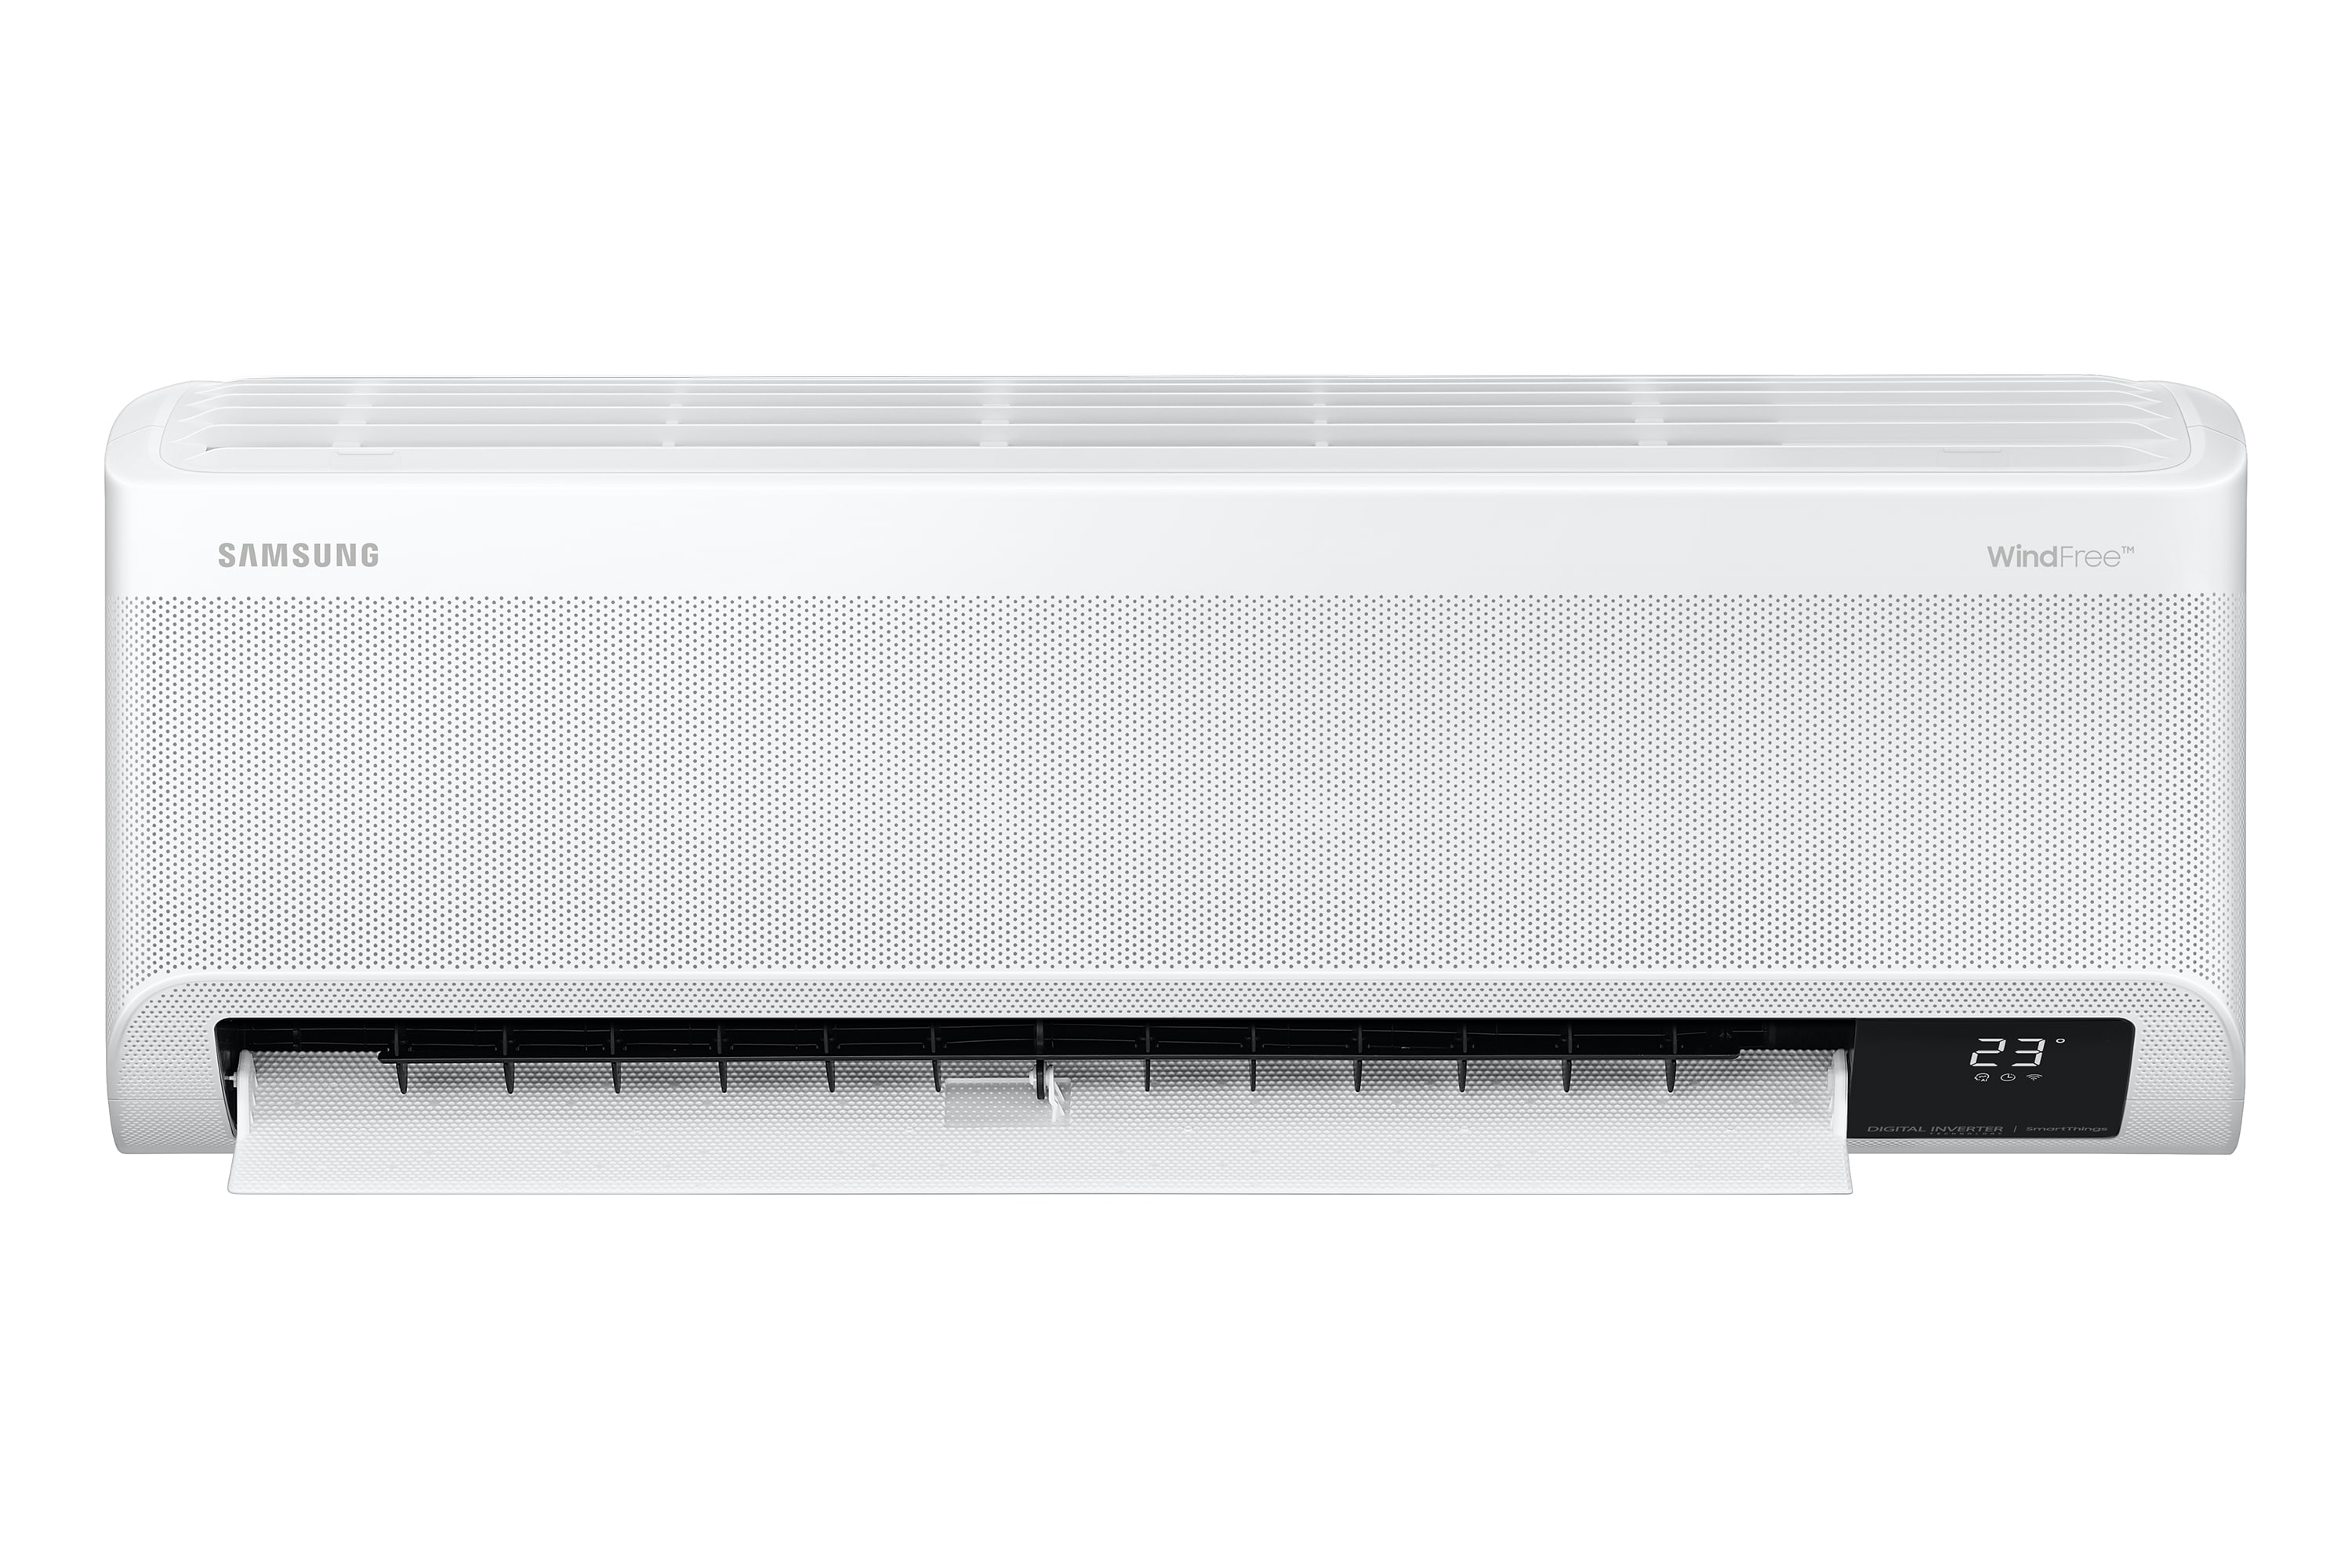 Samsung Inverter Windfree AC with motion sensor and WiFi 1.5 Ton